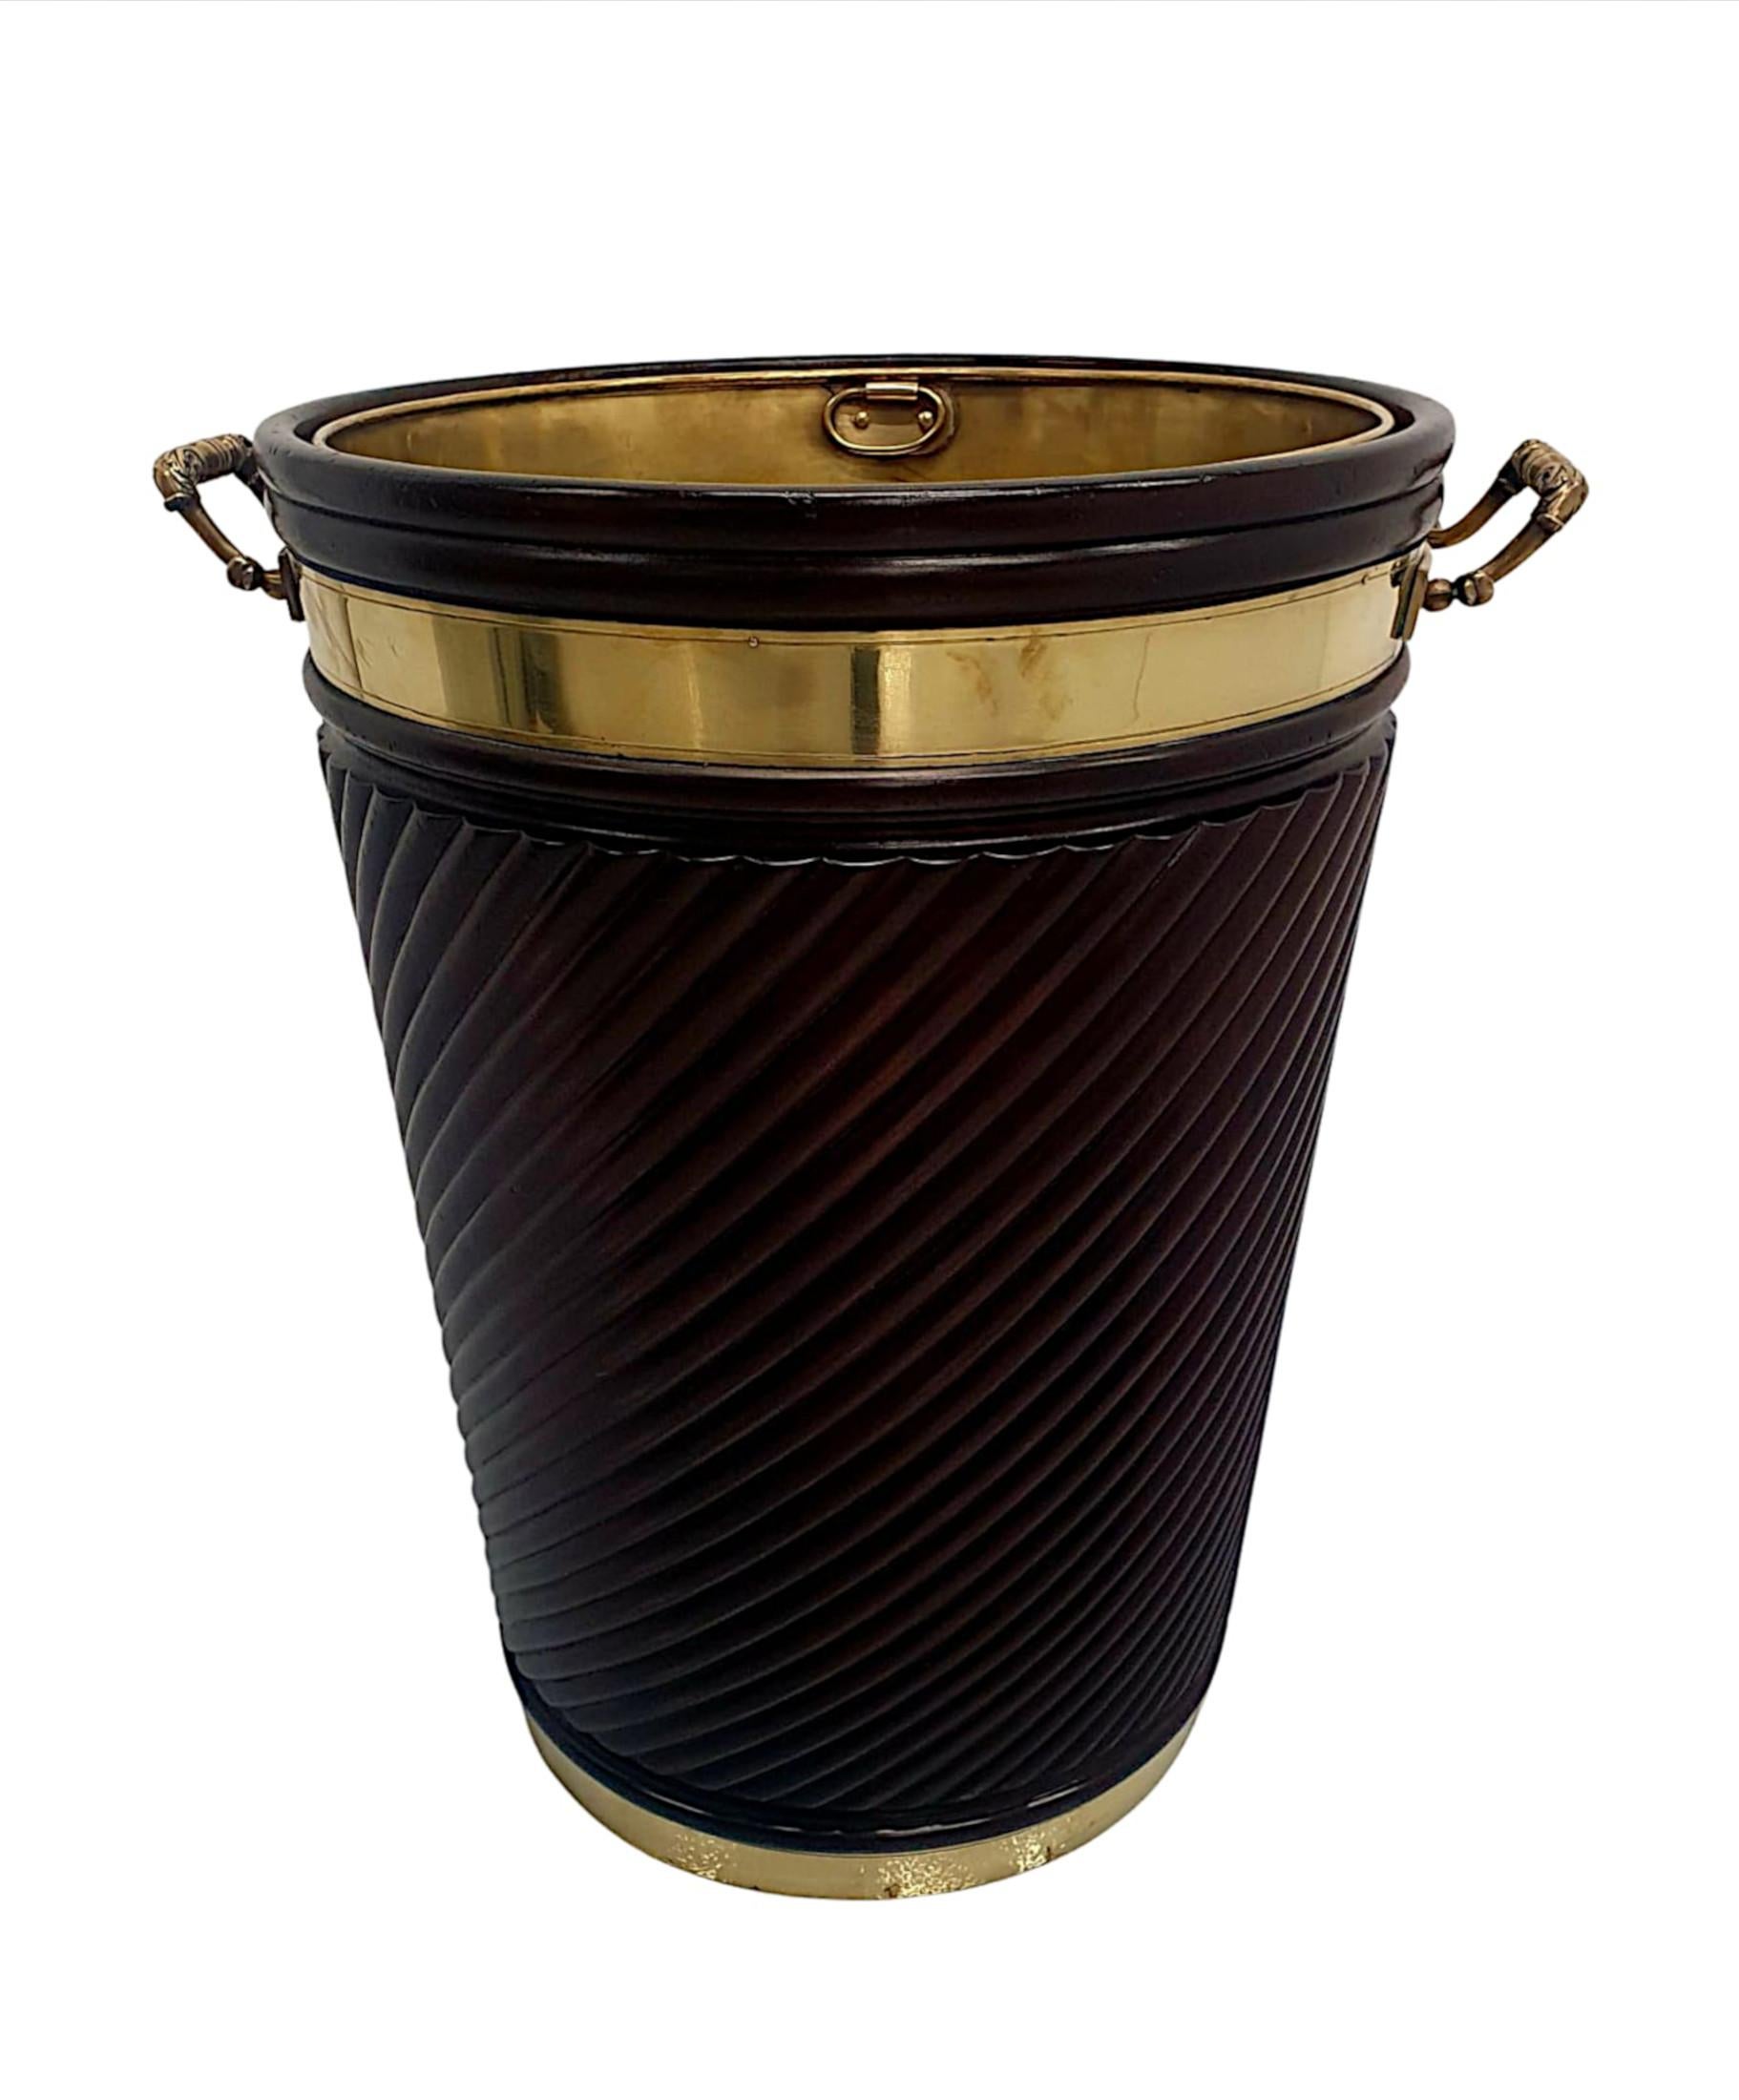 A fabulous Irish design mahogany brass bound peat bucket of exceptional quality, grand proportions and finely hand carved with rich patination and grain.  The moulded and reeded, brass bound body incorporates gorgeous spiral twist pattern detail and